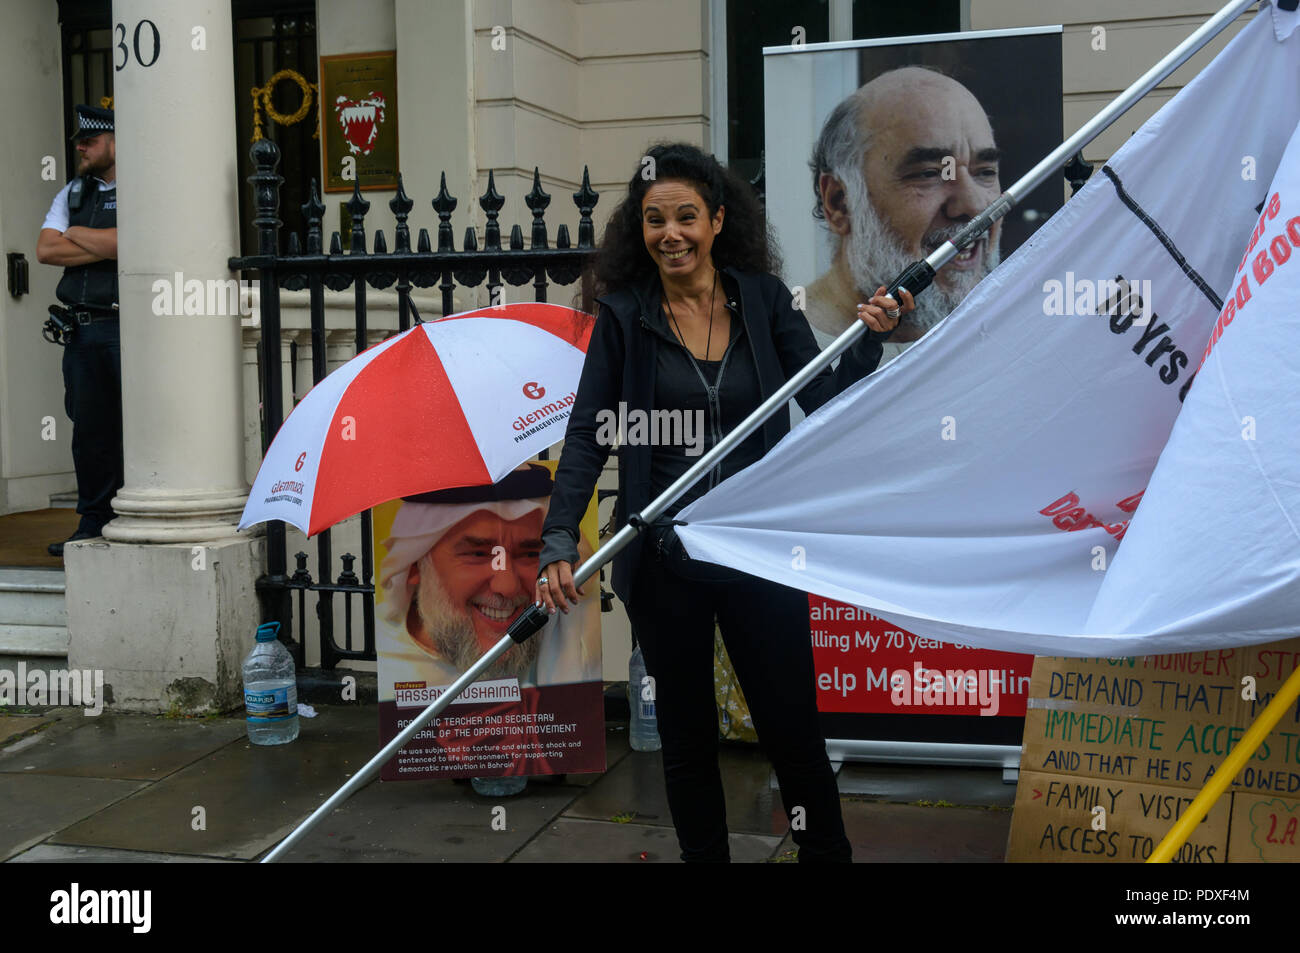 London, UK. 10th August 2018. Inminds Islamic human rights organisation get out their banner outside the Bahrain embassy for a vigil callings for the immediate release of Hassan Mushaima and all the other 5000 Bahraini prisoners of conscience languishing in the Al-Khalifa regimes jails. Credit: Peter Marshall/Alamy Live News Stock Photo